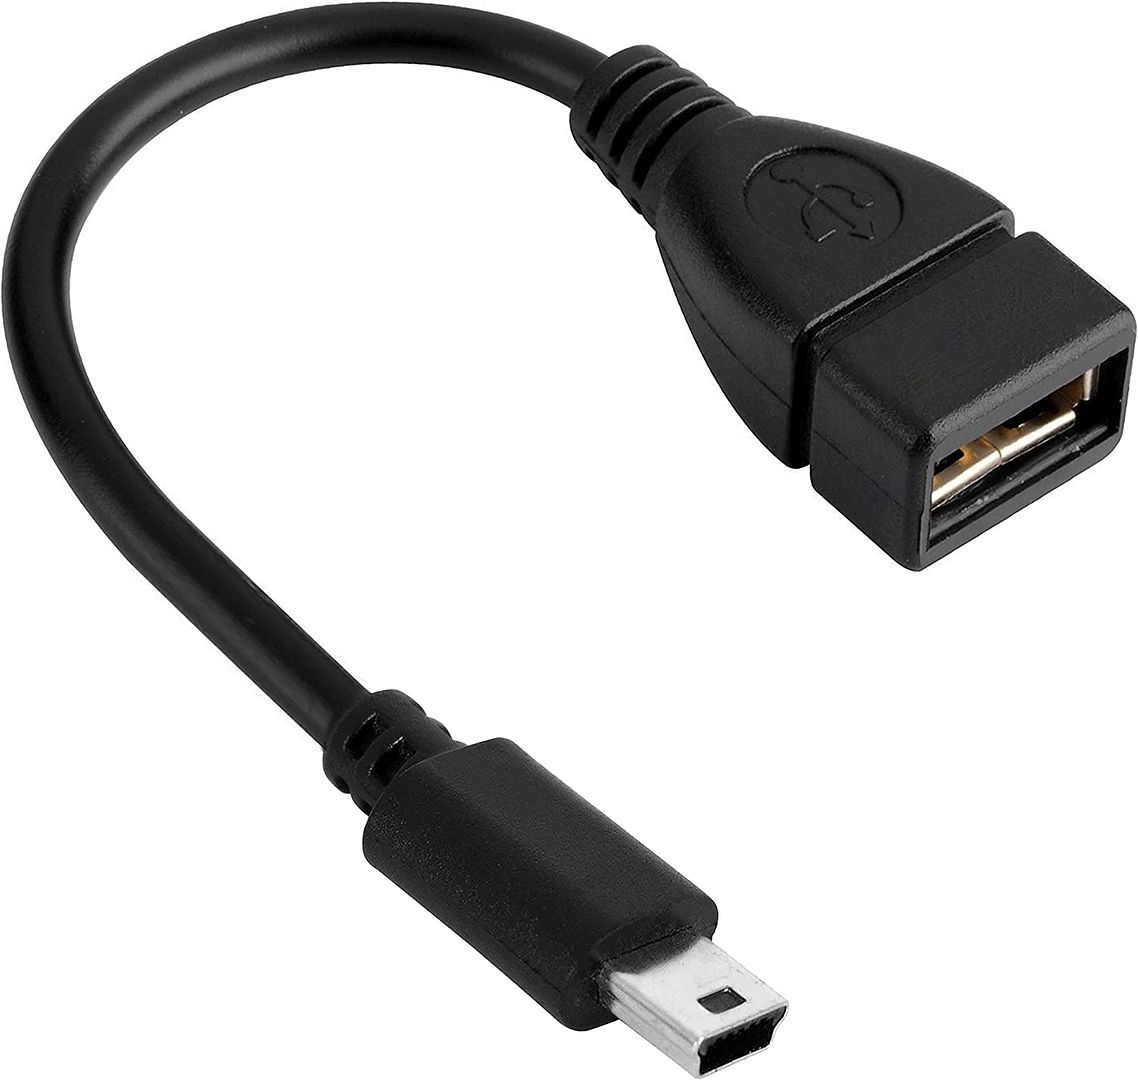 Mini USB OTG Cable for Digital Cameras - USB A Female to Mini USB B 5 Pin Male Adapter Cable